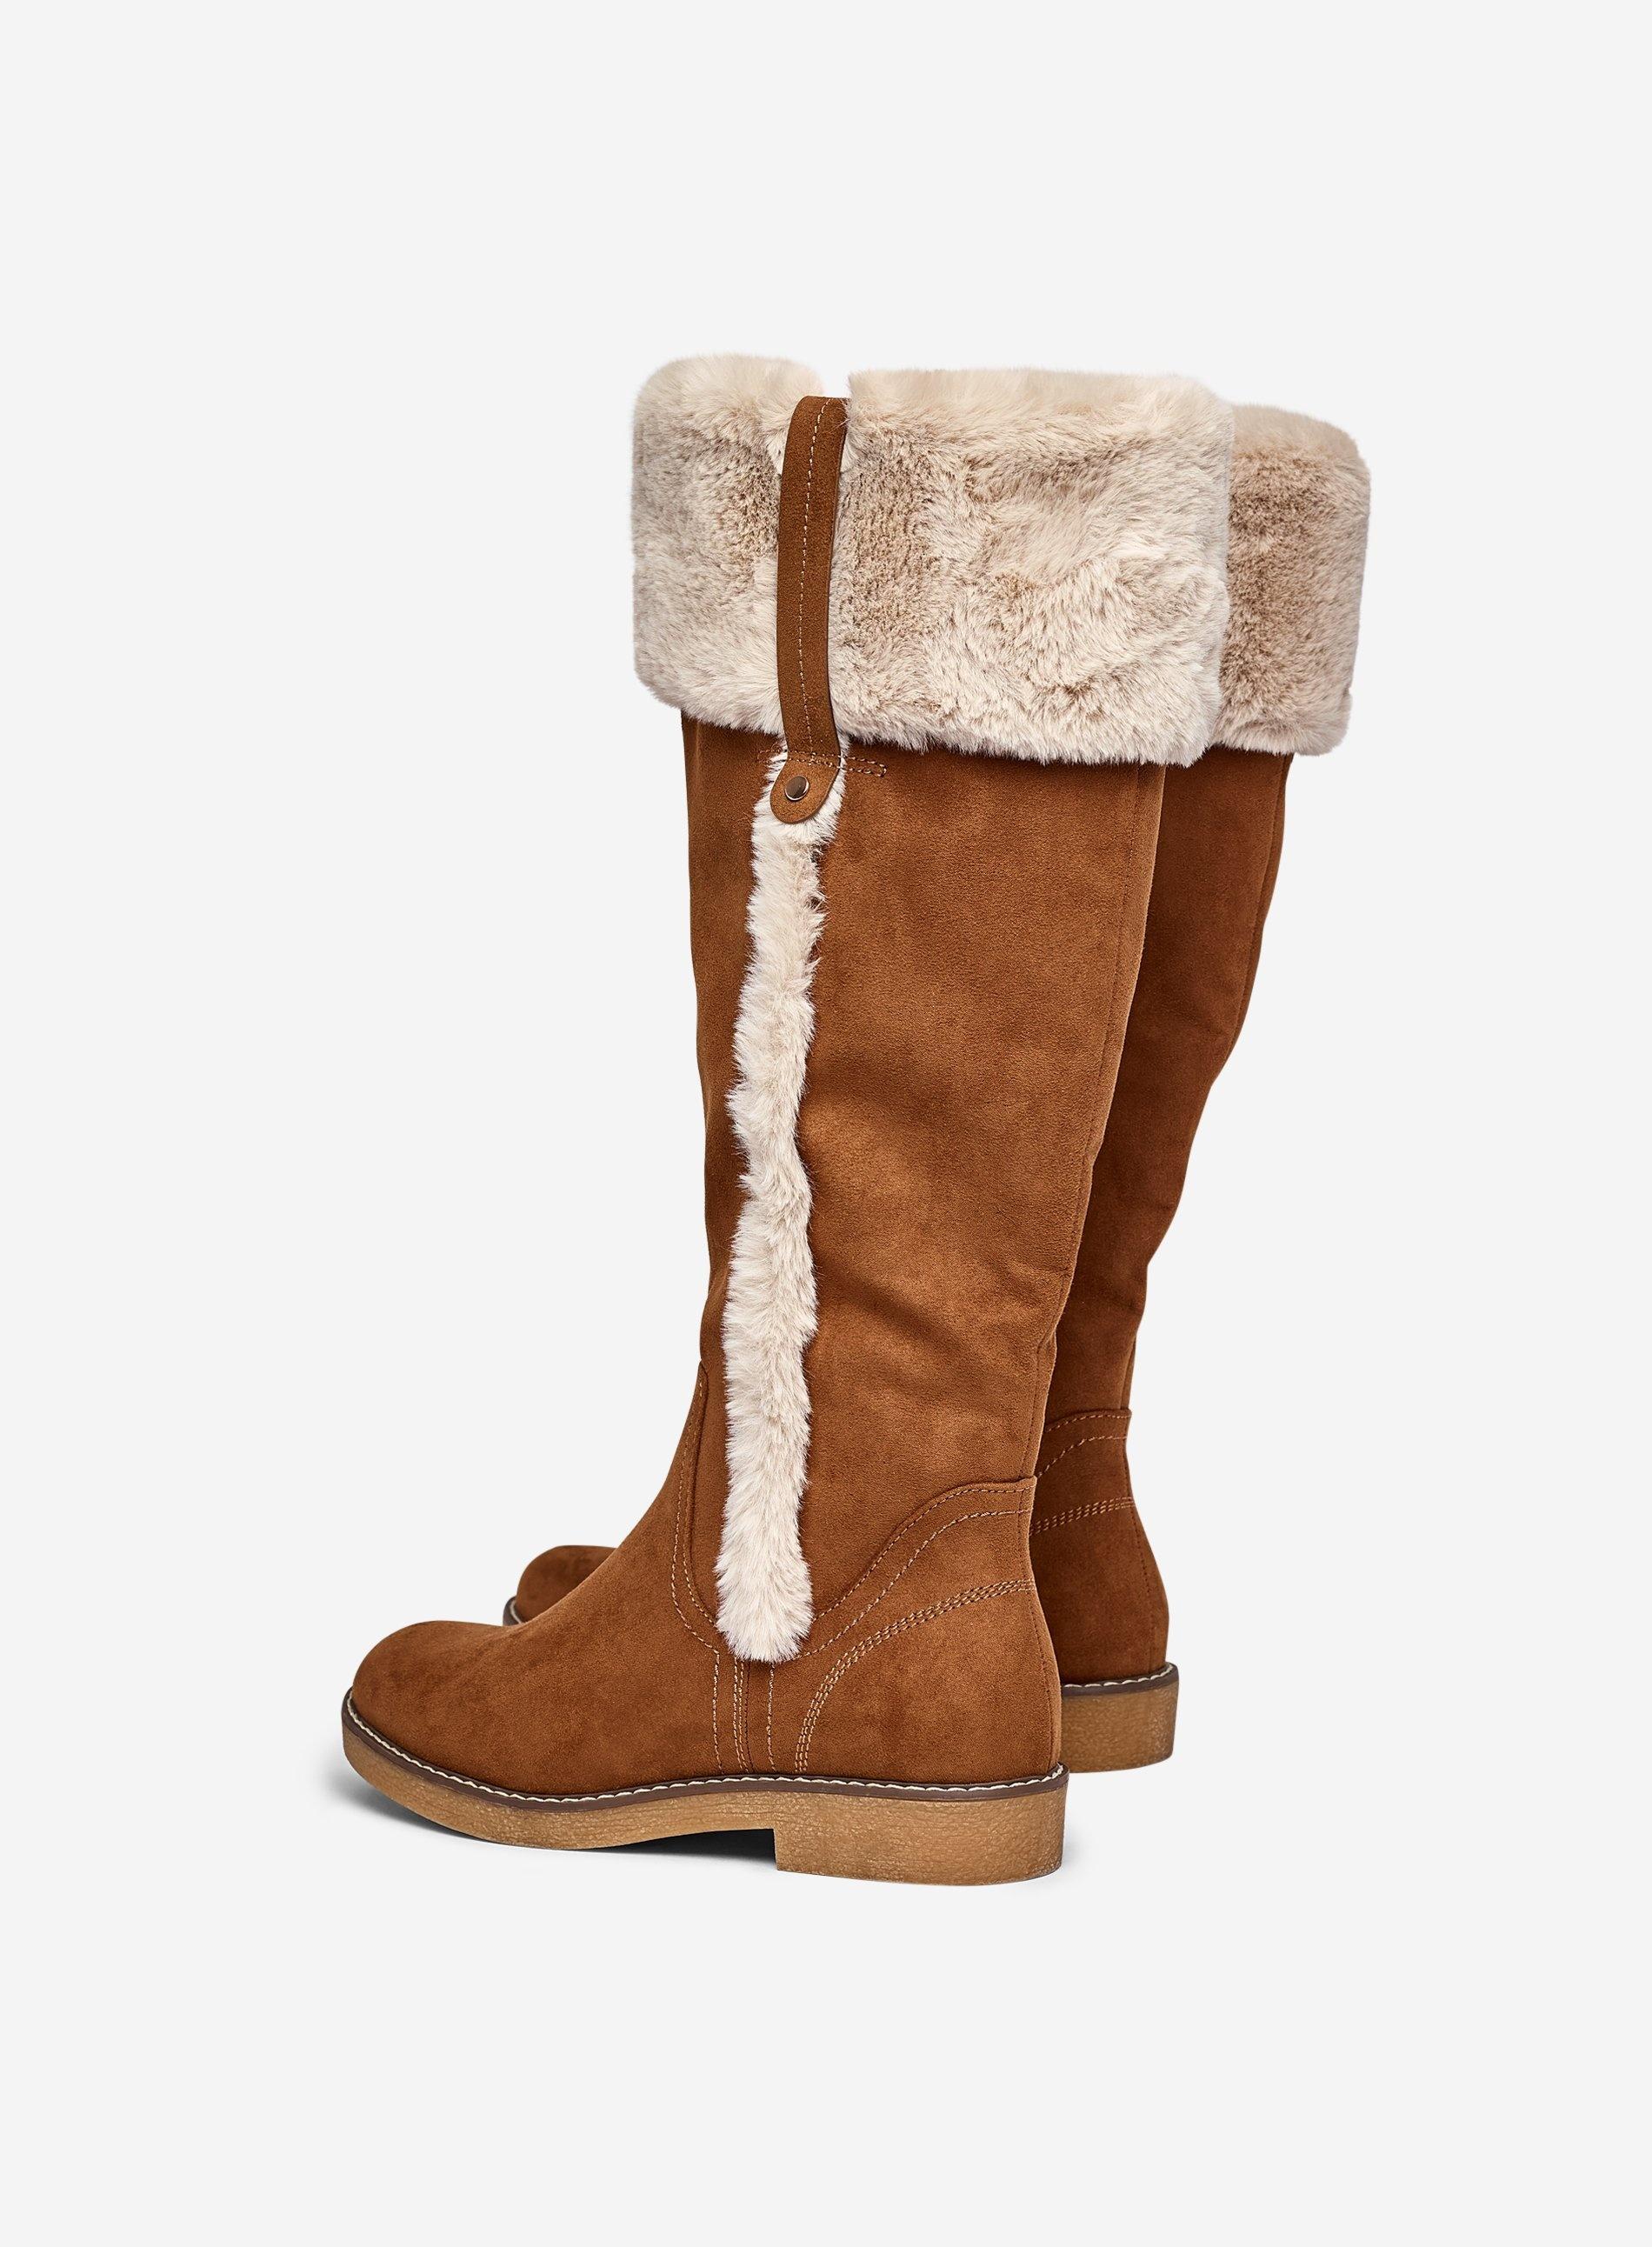 tan boots with fur trim